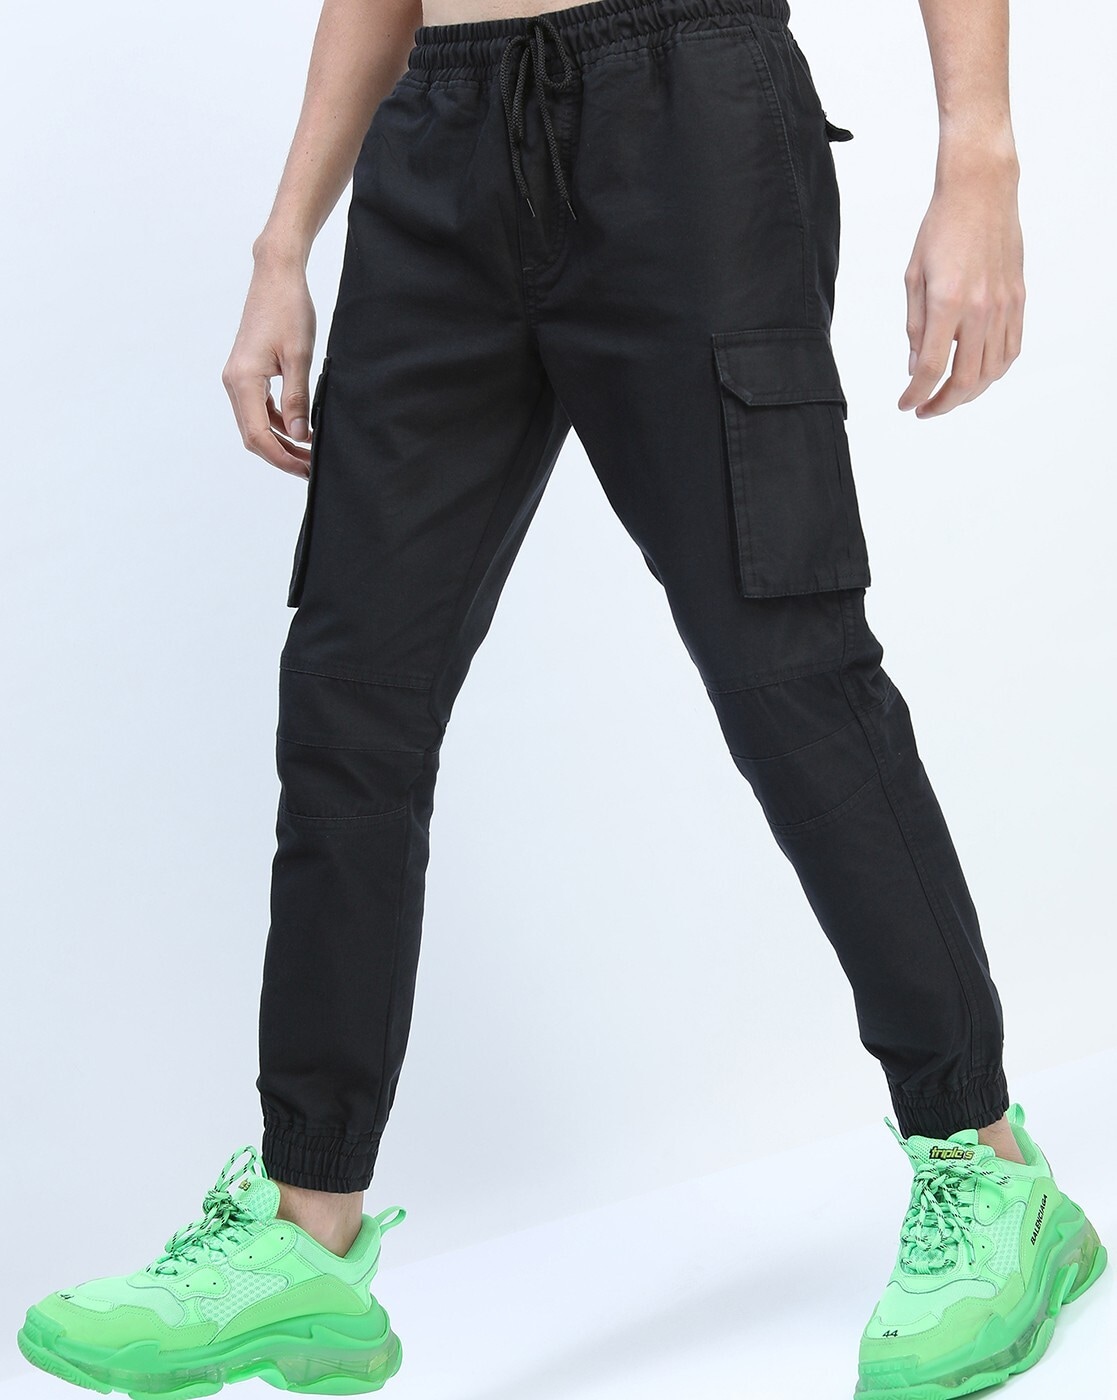 Trendy Black TrousersJoggers Pants and Toko Stretchable Cargo Pants for  Girls and womens Trousers  Pants